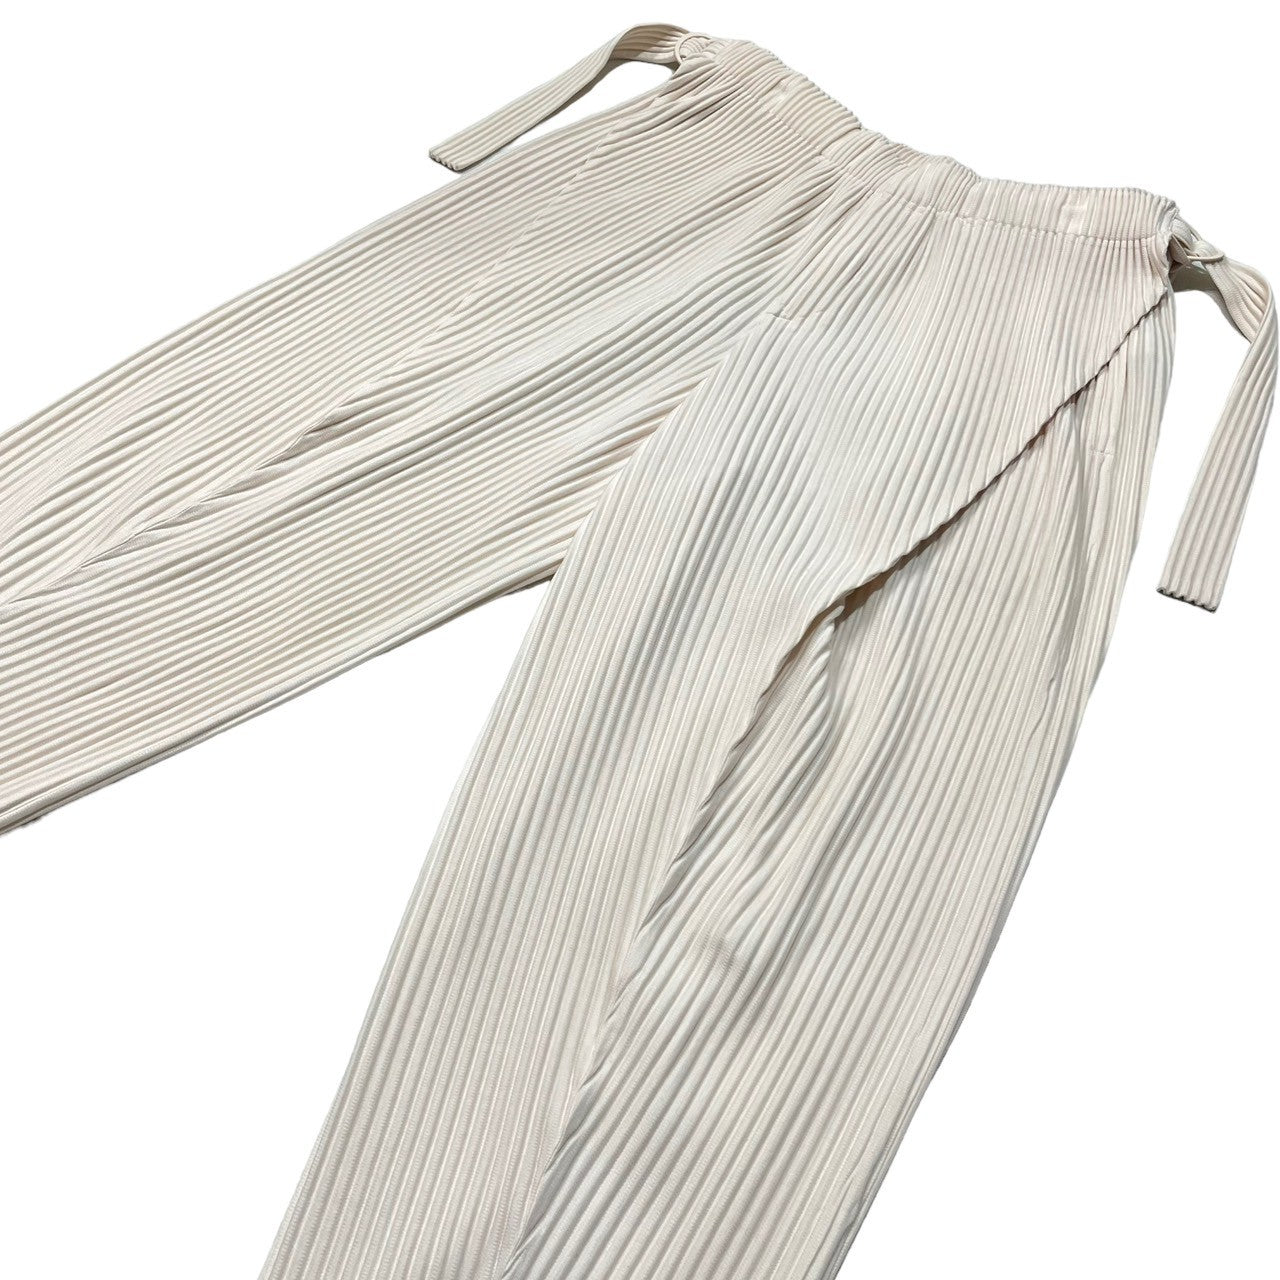 HOMME PLISSE ISSEY MIYAKE(オムプリッセイッセイミヤケ) 22SS BODY ARCH belted pleated pants ベルテッド プリーツ パンツ HP21JF176 SIZE 3(L) ライトピンク